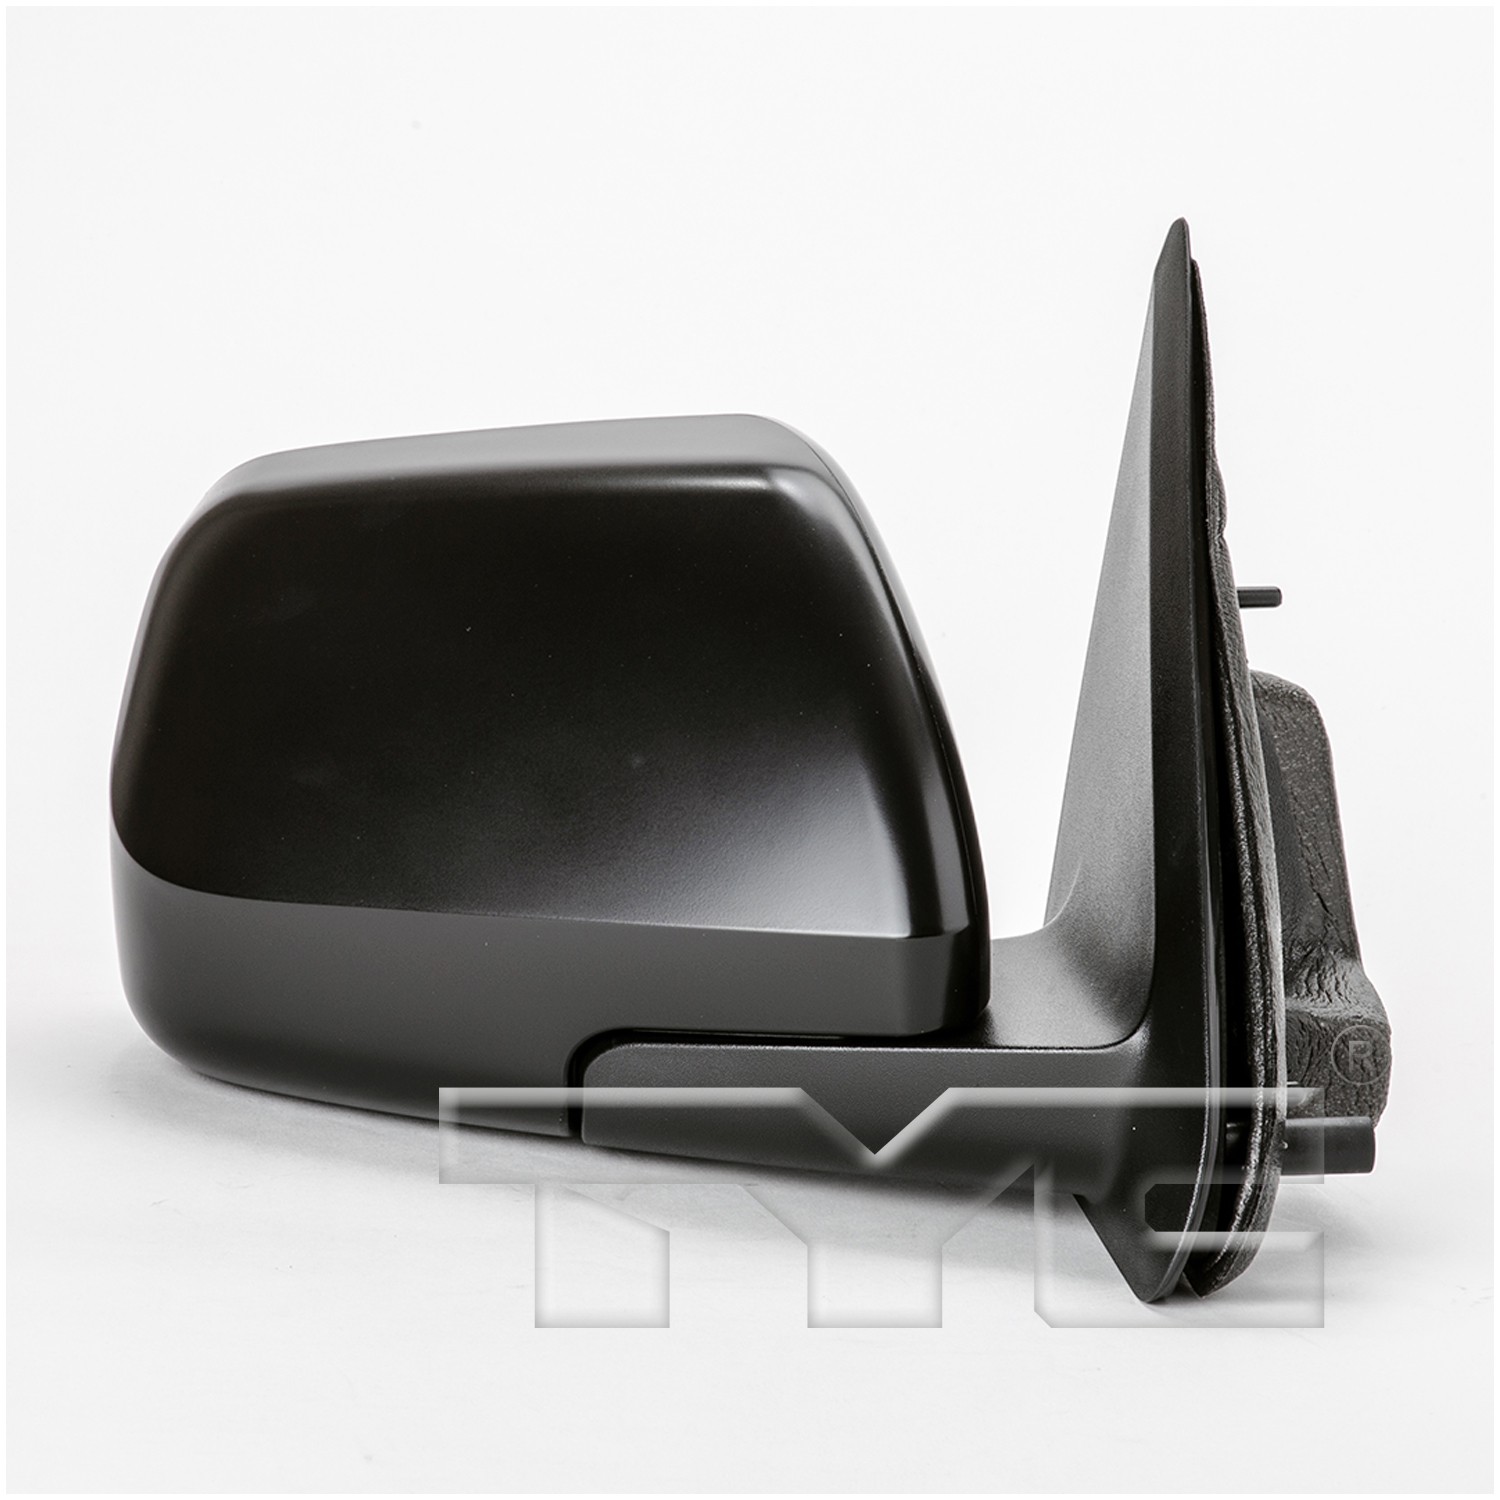 Aftermarket MIRRORS for MERCURY - MARINER, MARINER,08-09,RT Mirror outside rear view